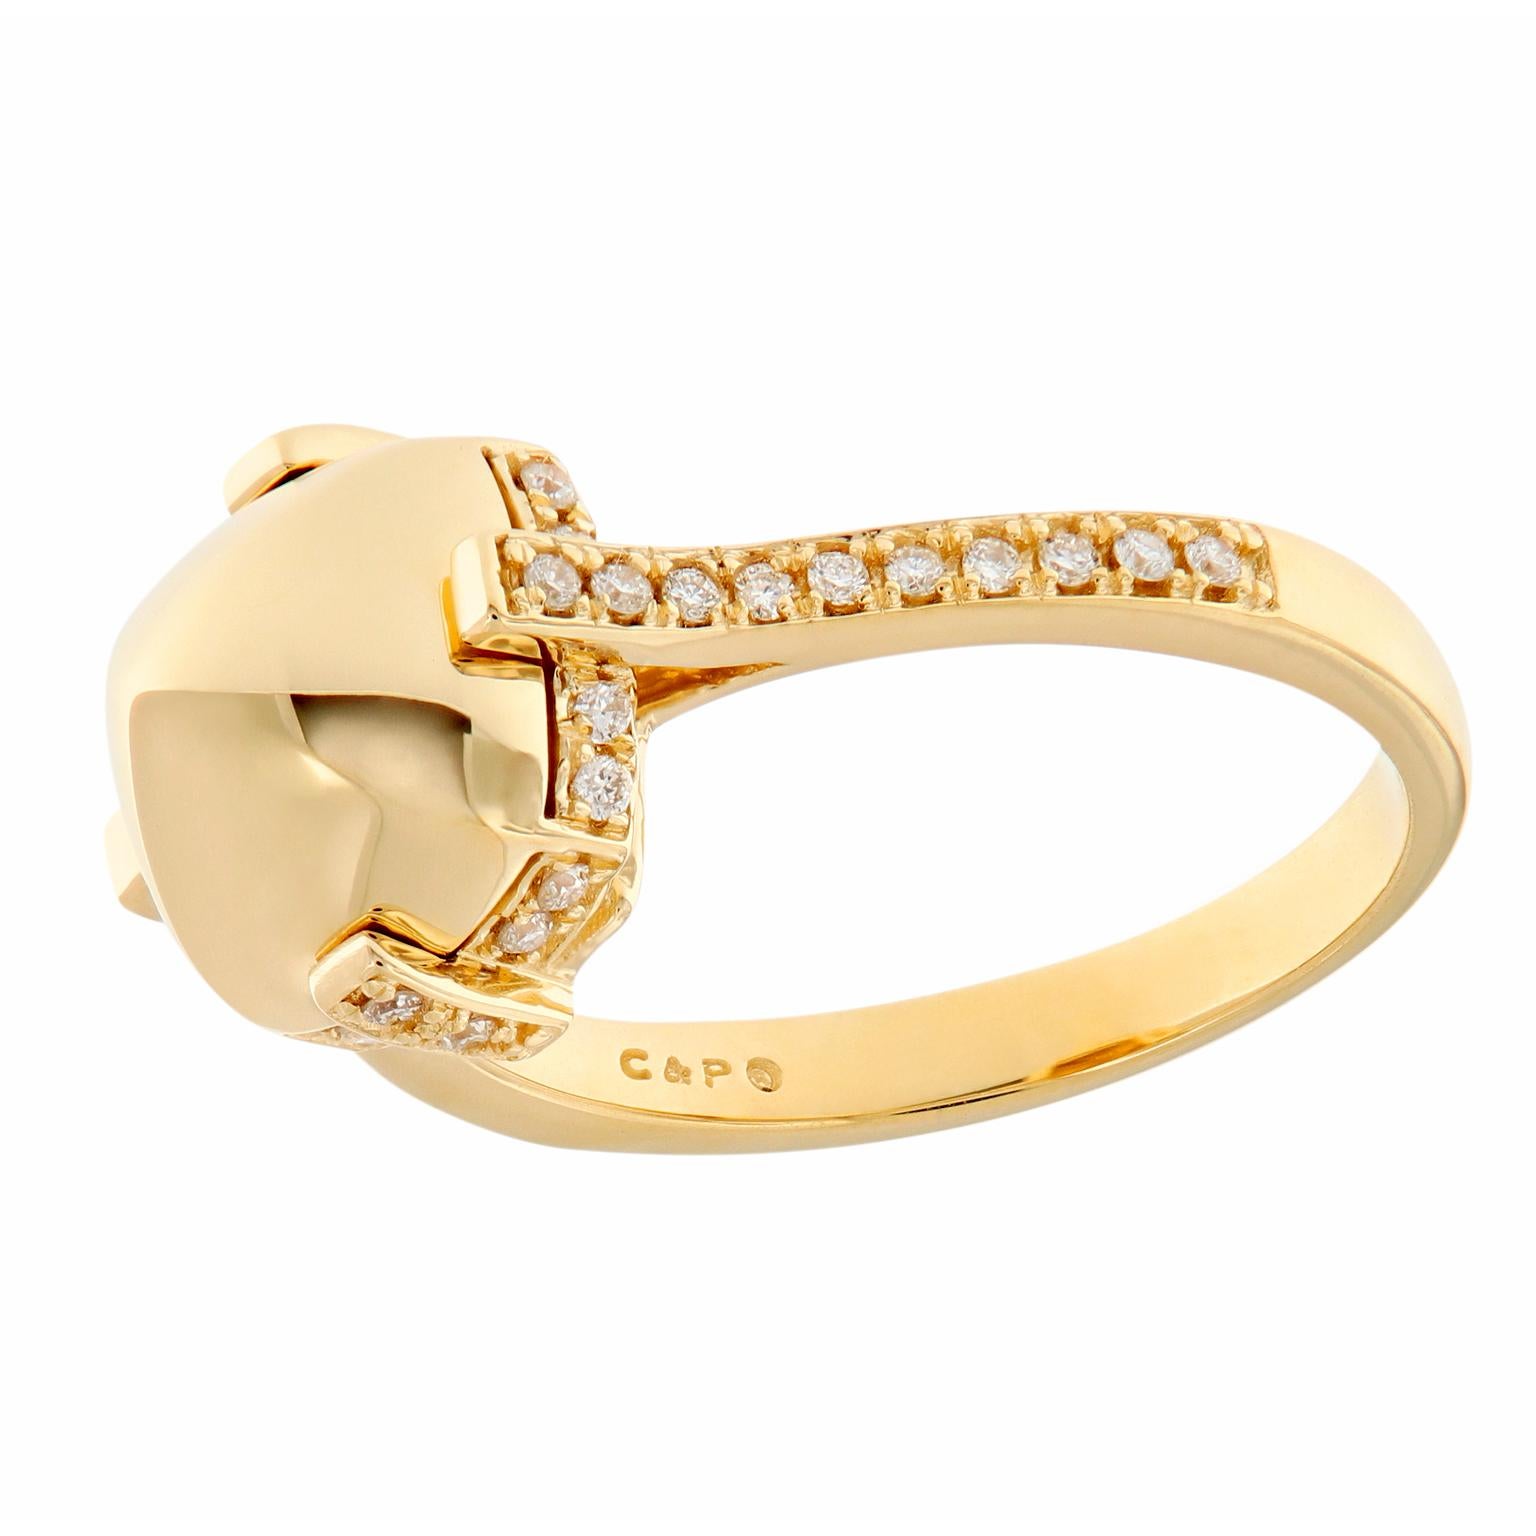 GOSHWARA is a term used to describe a perfect shape. Forming a silhouette of perfect proportions, this striking 18k yellow gold and iconic surgarloaf shaped ring is accented with a halo of pave set diamonds and a diamond studded band. Ring size